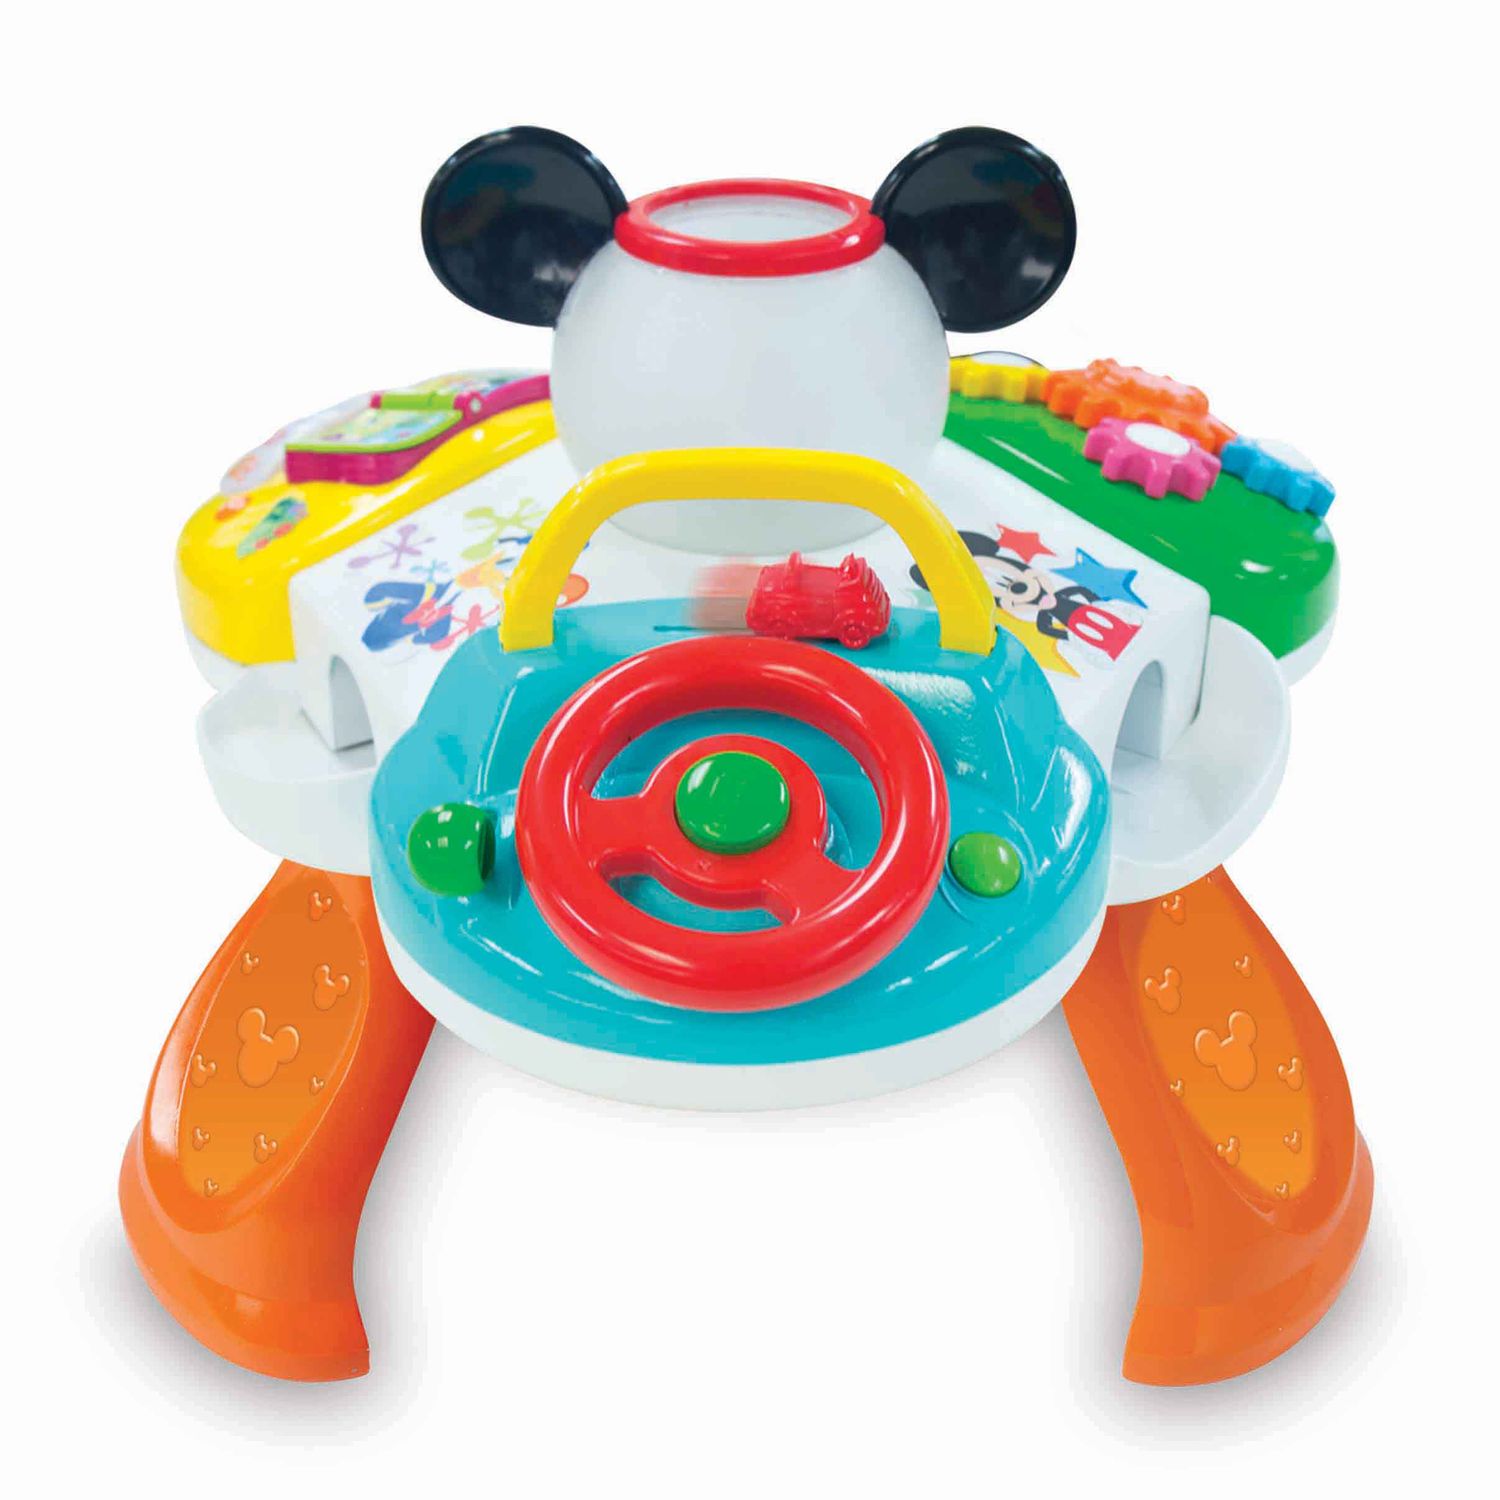 mickey mouse activity table